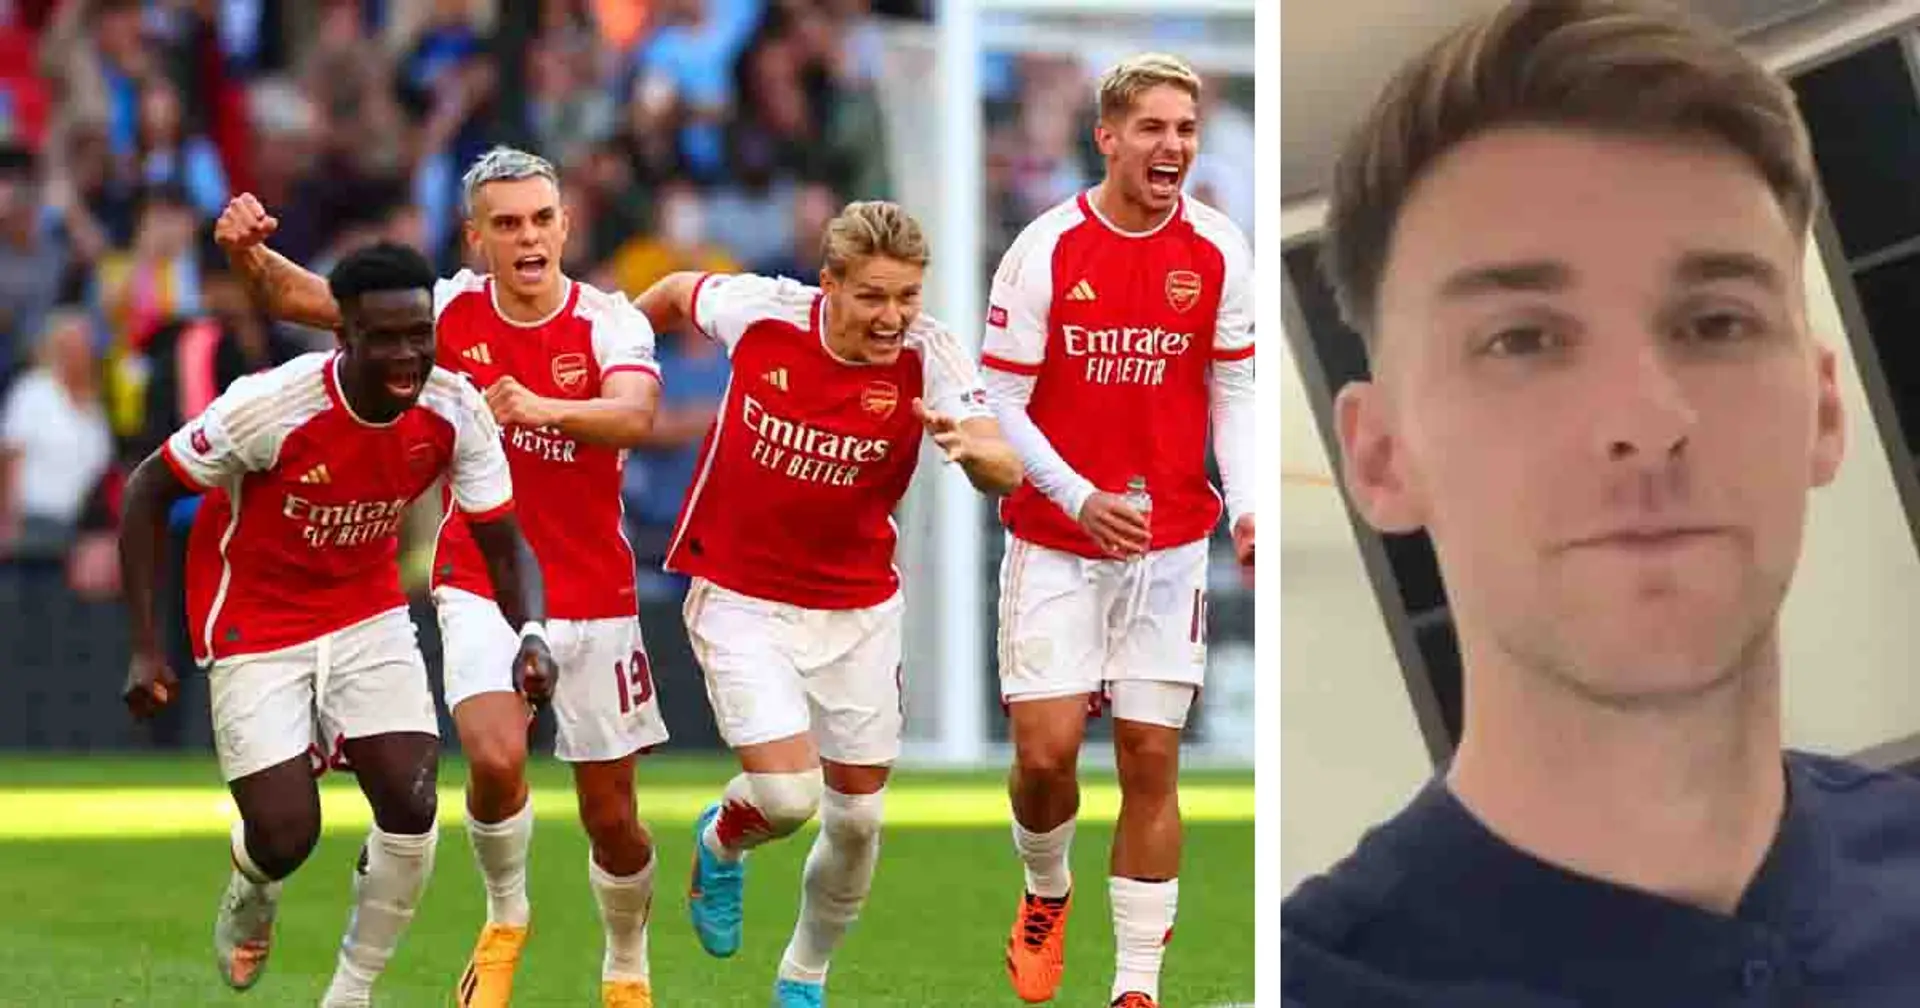 Kieran Tierney reveals one Arsenal player that influenced his decision to join Real Sociedad